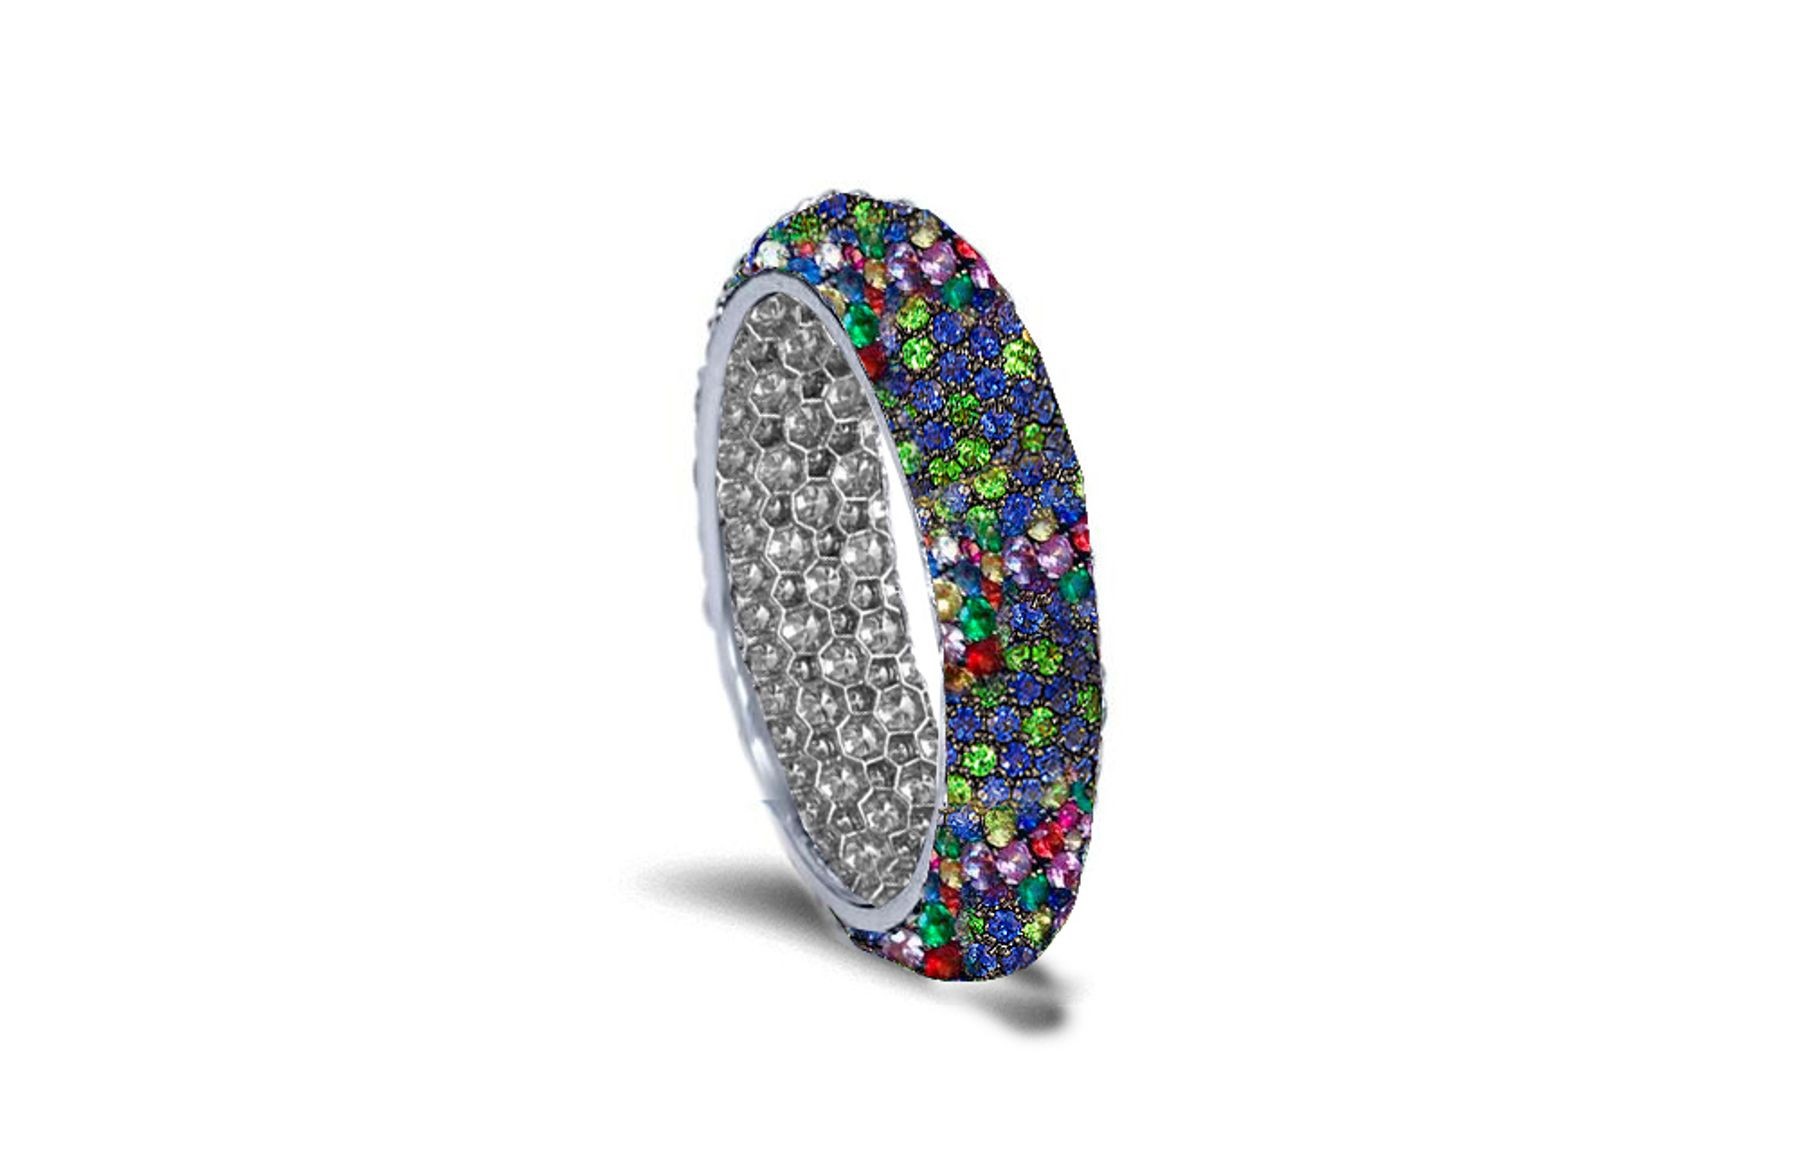 Mark Life's Many Milestones With White Diamonds and Colored Stone Eternity Rings as Wedding Anniversary Bands